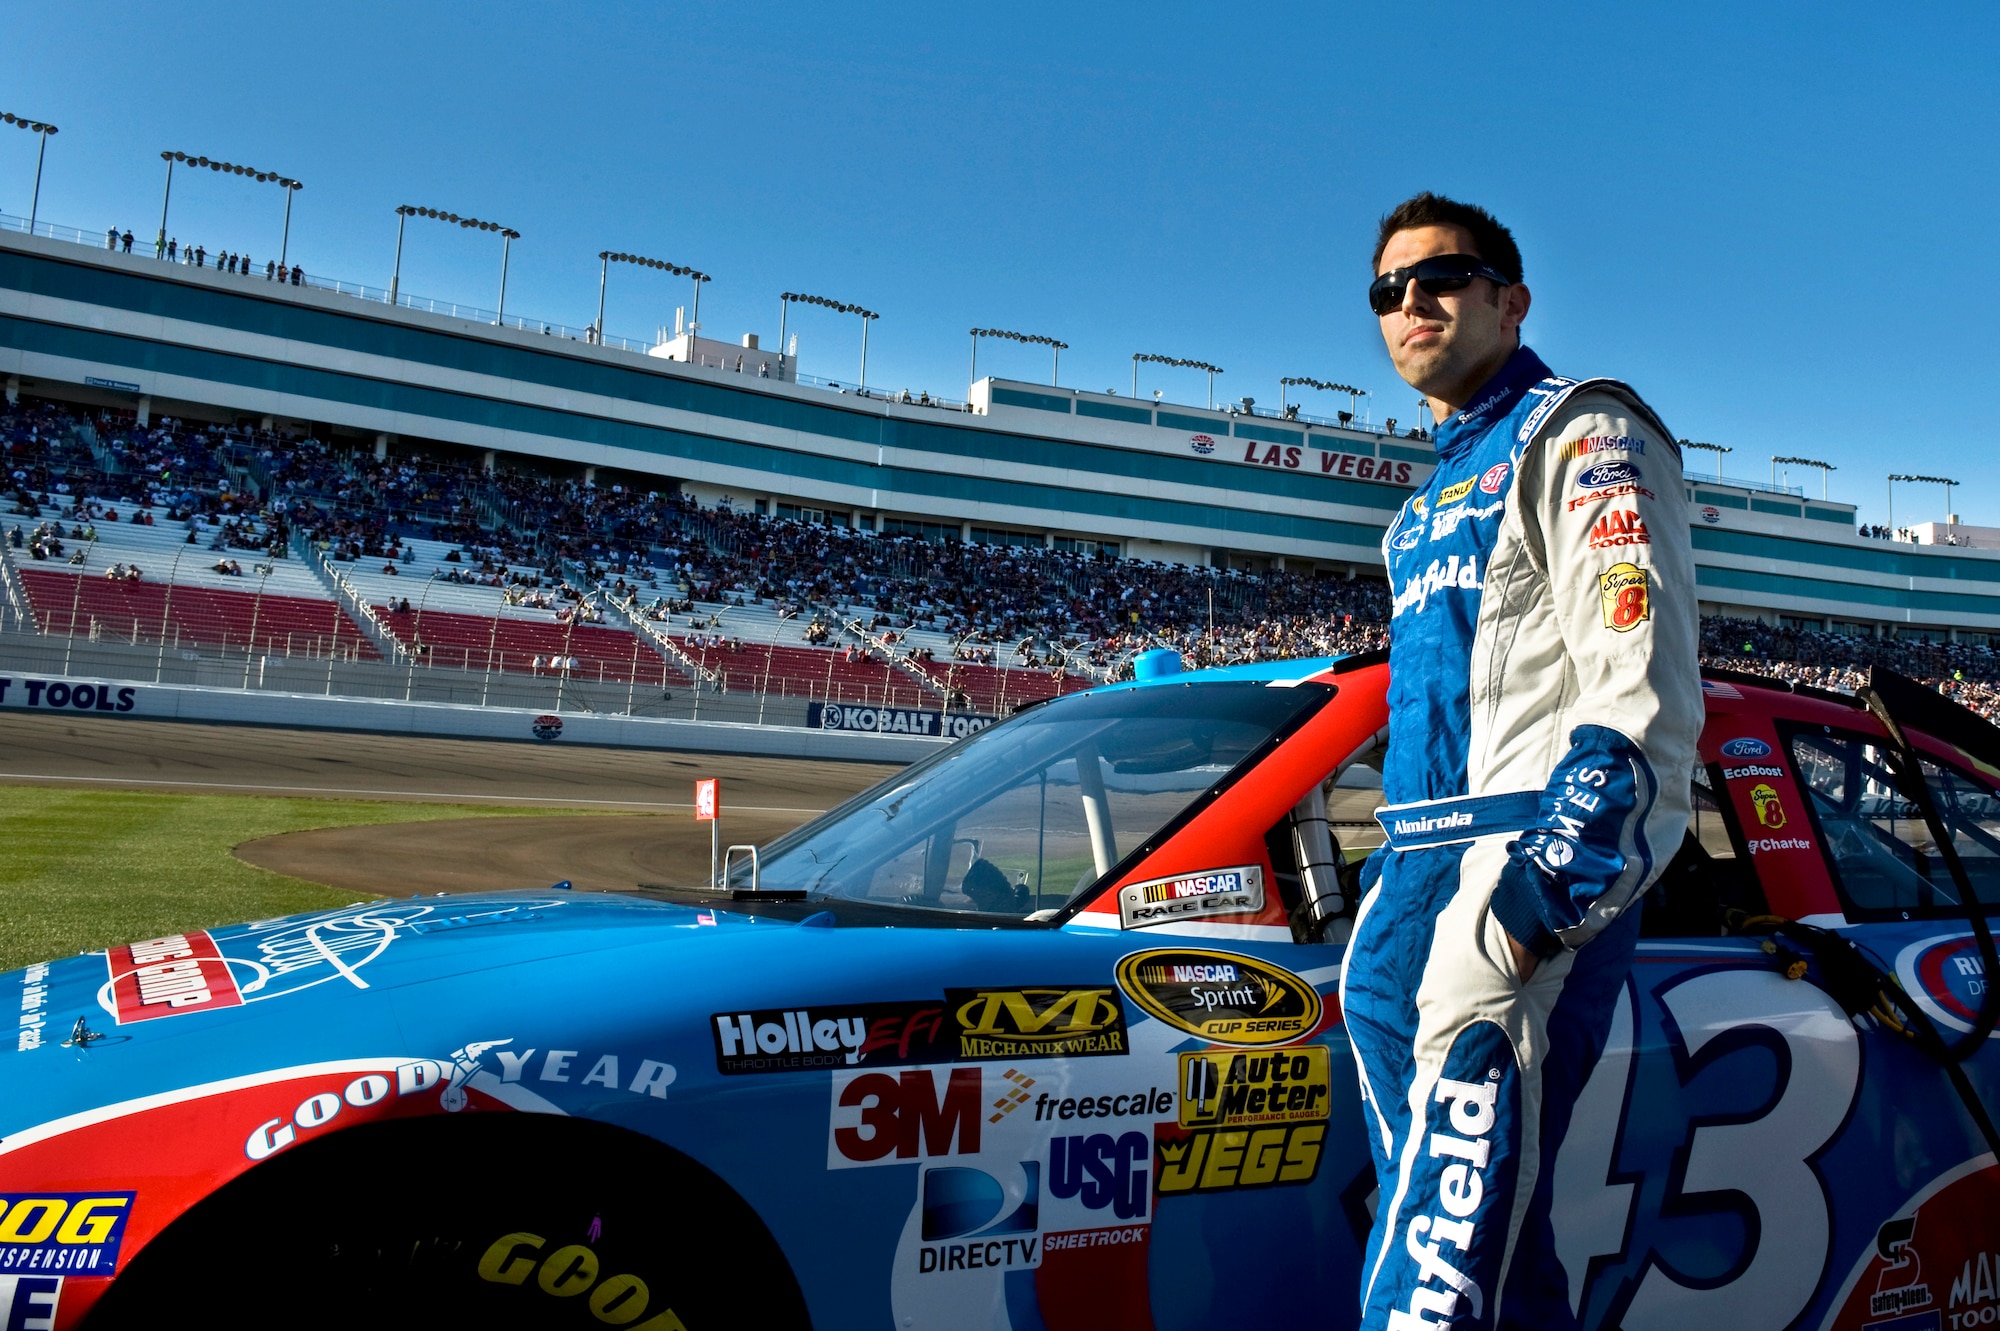 Aric Almirola, driver for the Air Force-sponsored No. 43 car, stands near his ride prior to the qualifying round for the Sprint Cup Series Race March 9, 2012 at the Las Vegas Motor Speedway. Almirola said he draws inspiration from Airmen as role models. (U.S. Air Force photo by Airman 1st Class Daniel Hughes)
